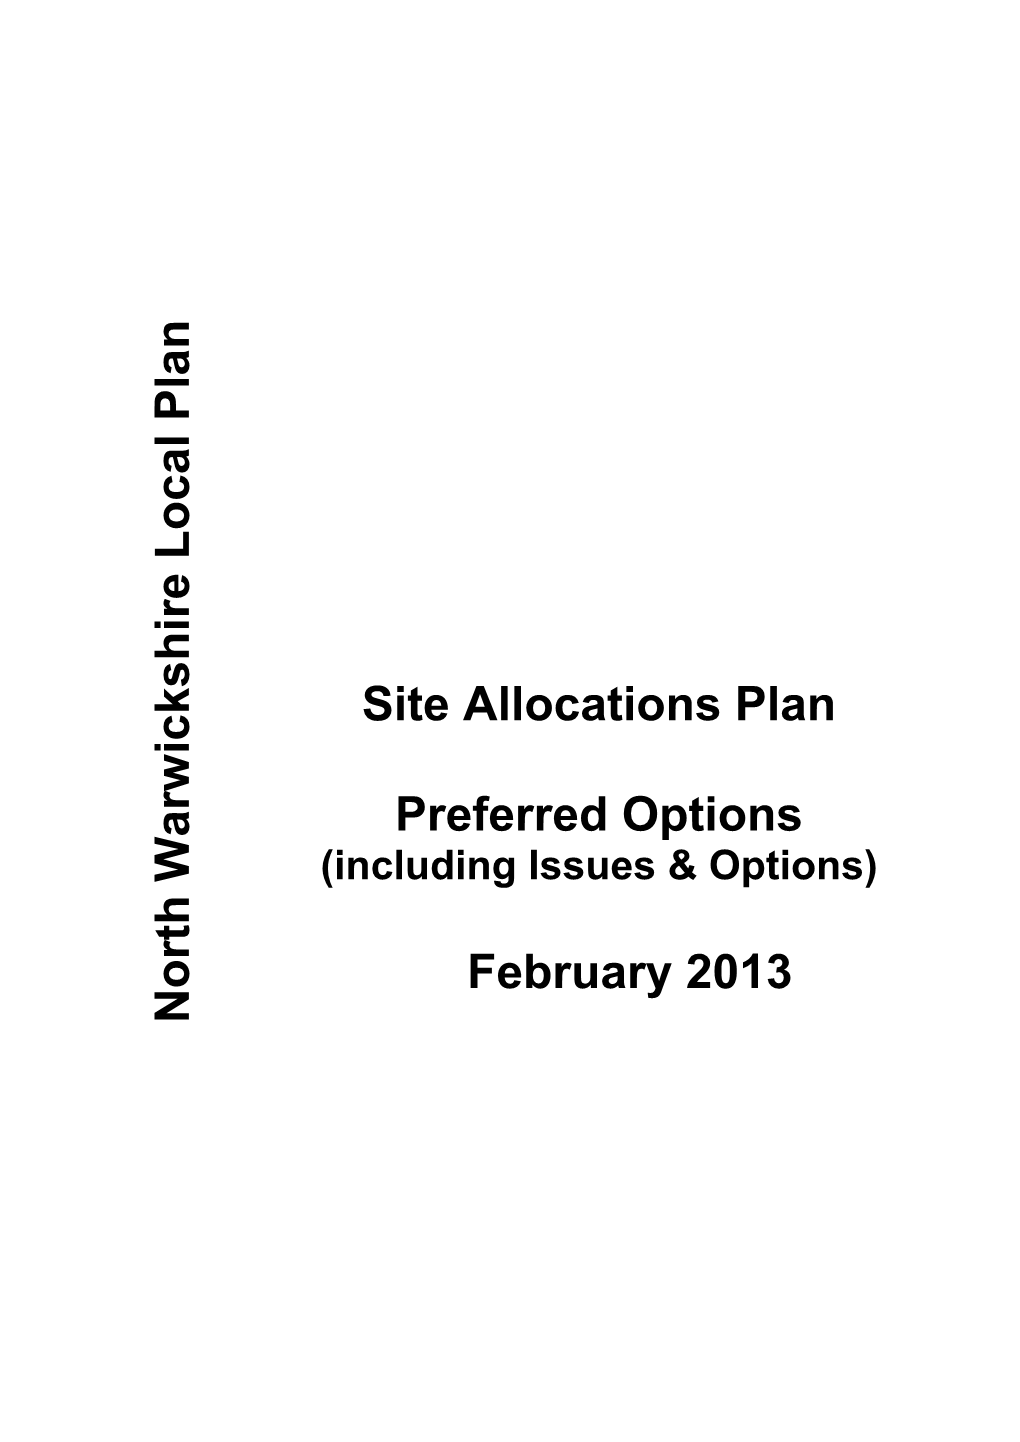 Download Site Allocations Plan Preferred Options